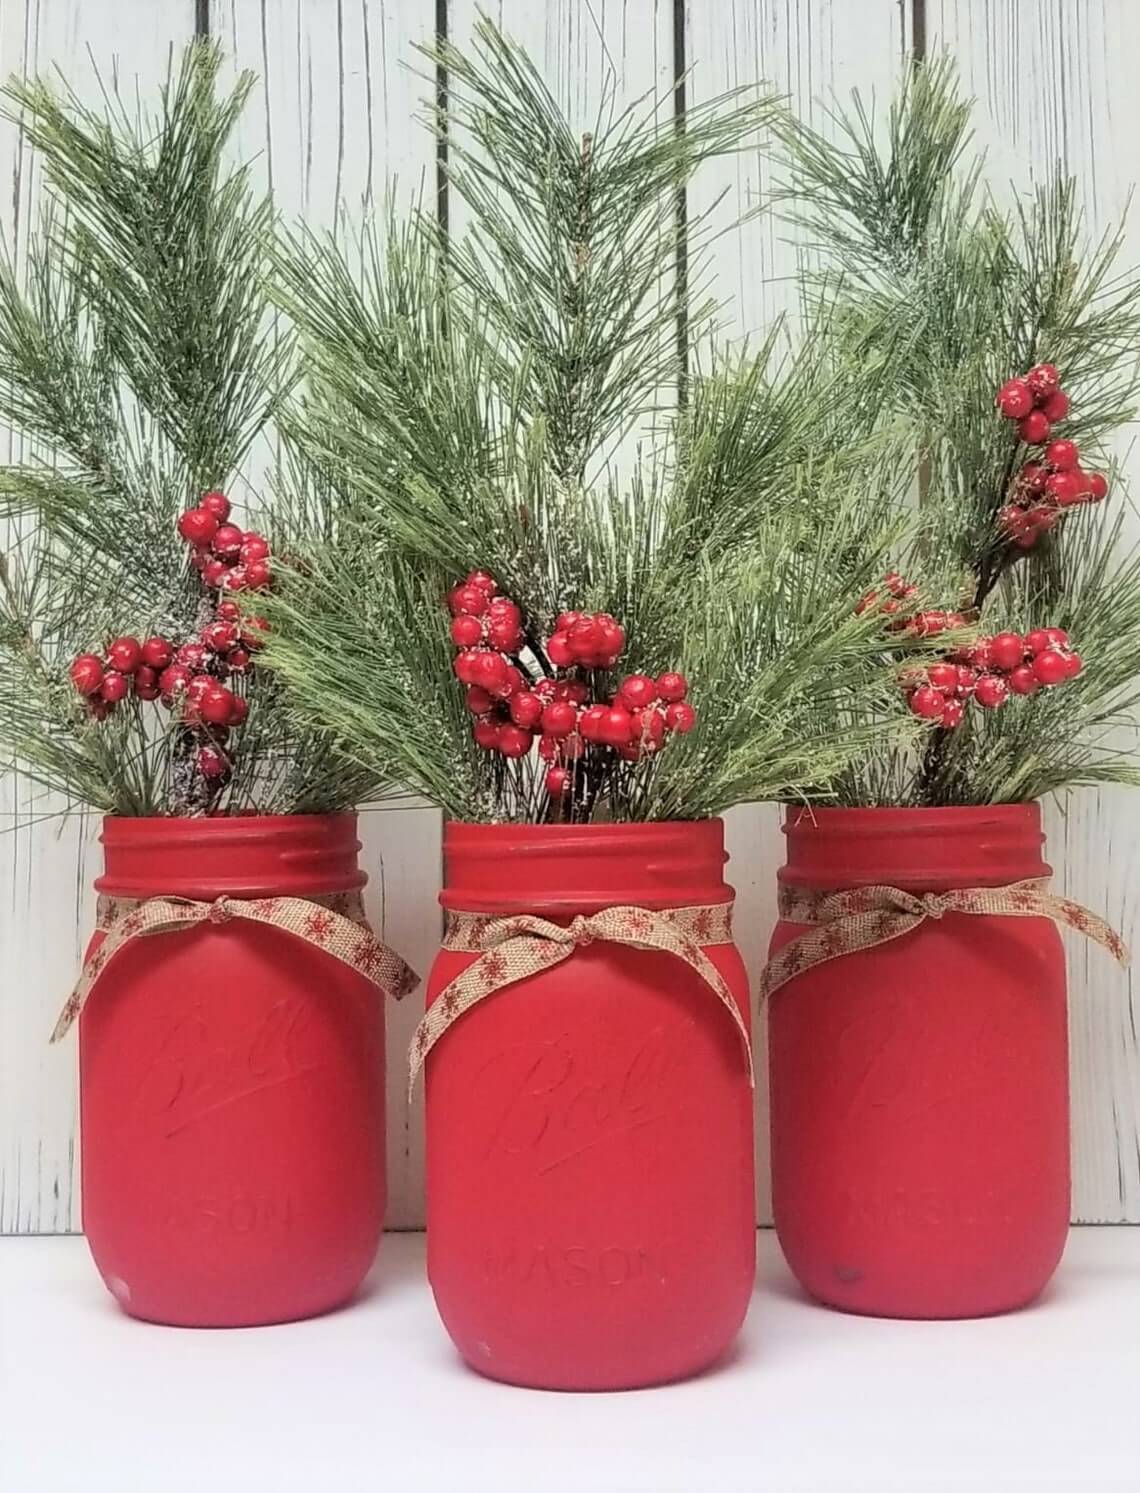 Rustic and Red Painted Mason Jar Centerpieces